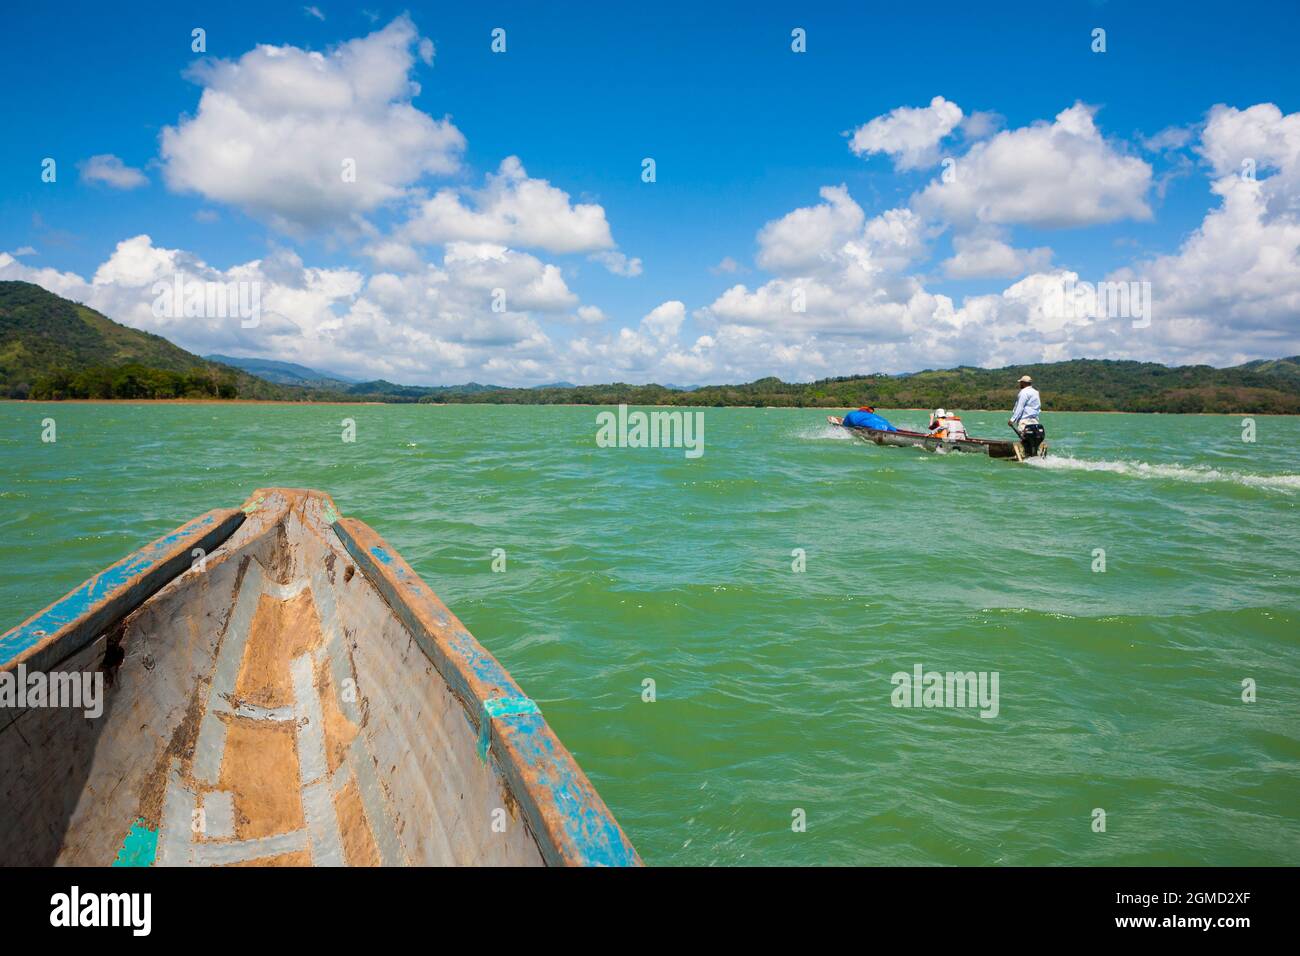 Two dugout canoes with travellers are crossing Alajuela lake, Panama province, Republic of Panama, Central America. Stock Photo